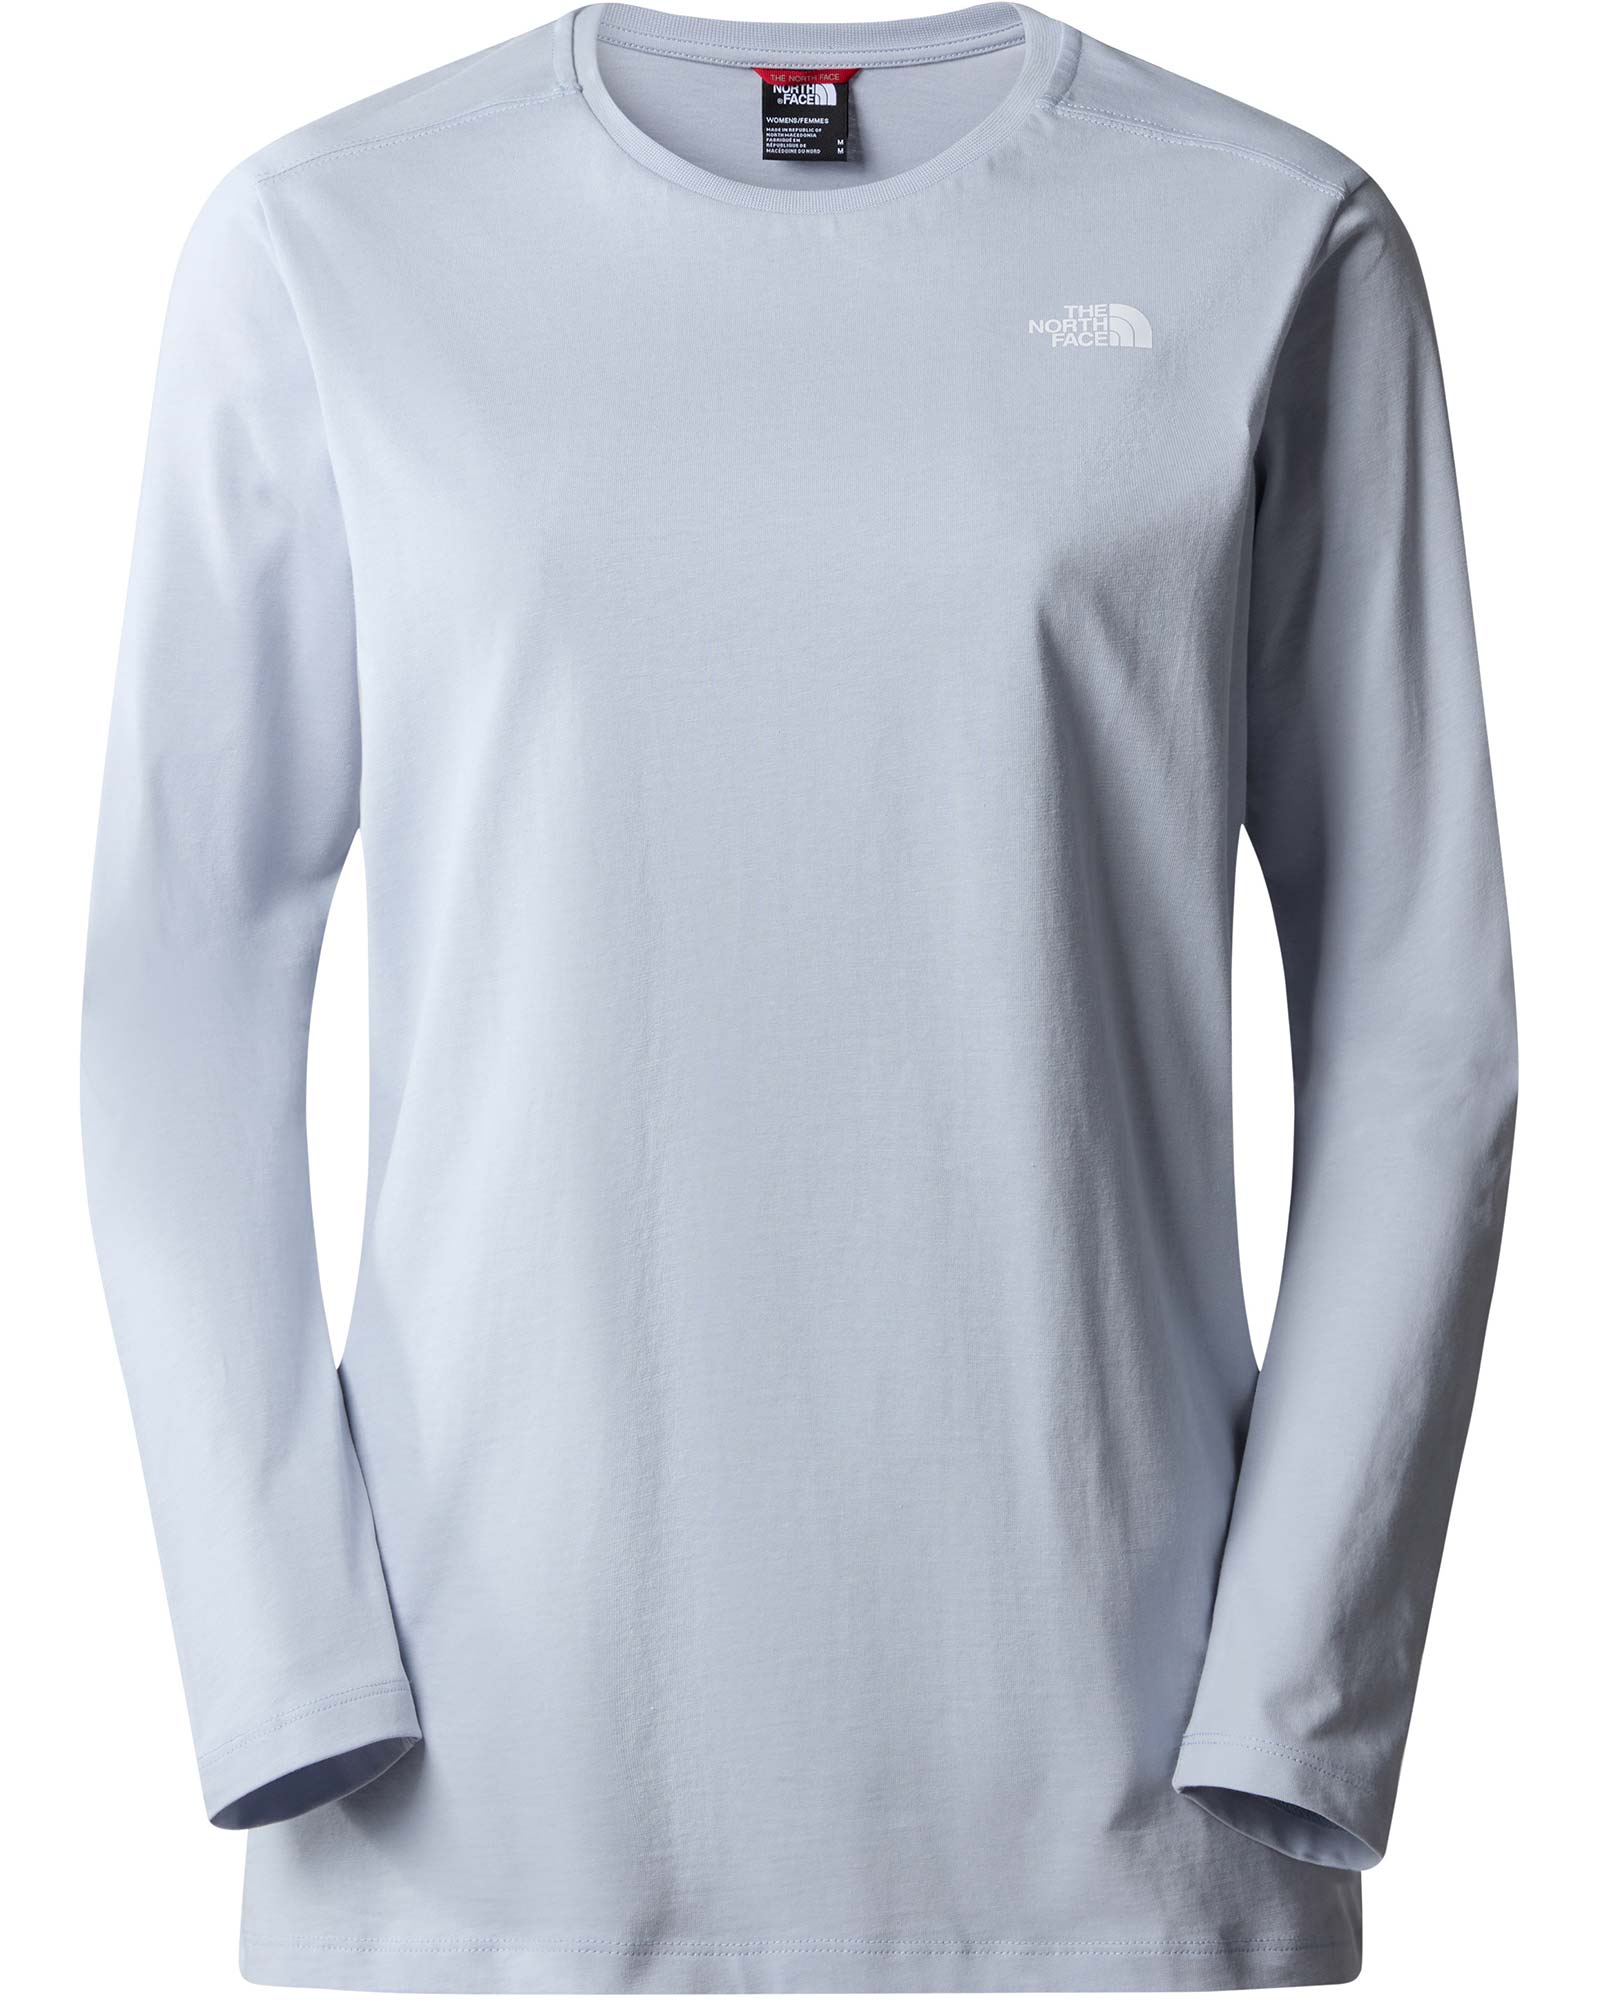 The North Face Simple Dome Women’s Long Sleeve T Shirt - Dusty Periwinkle S